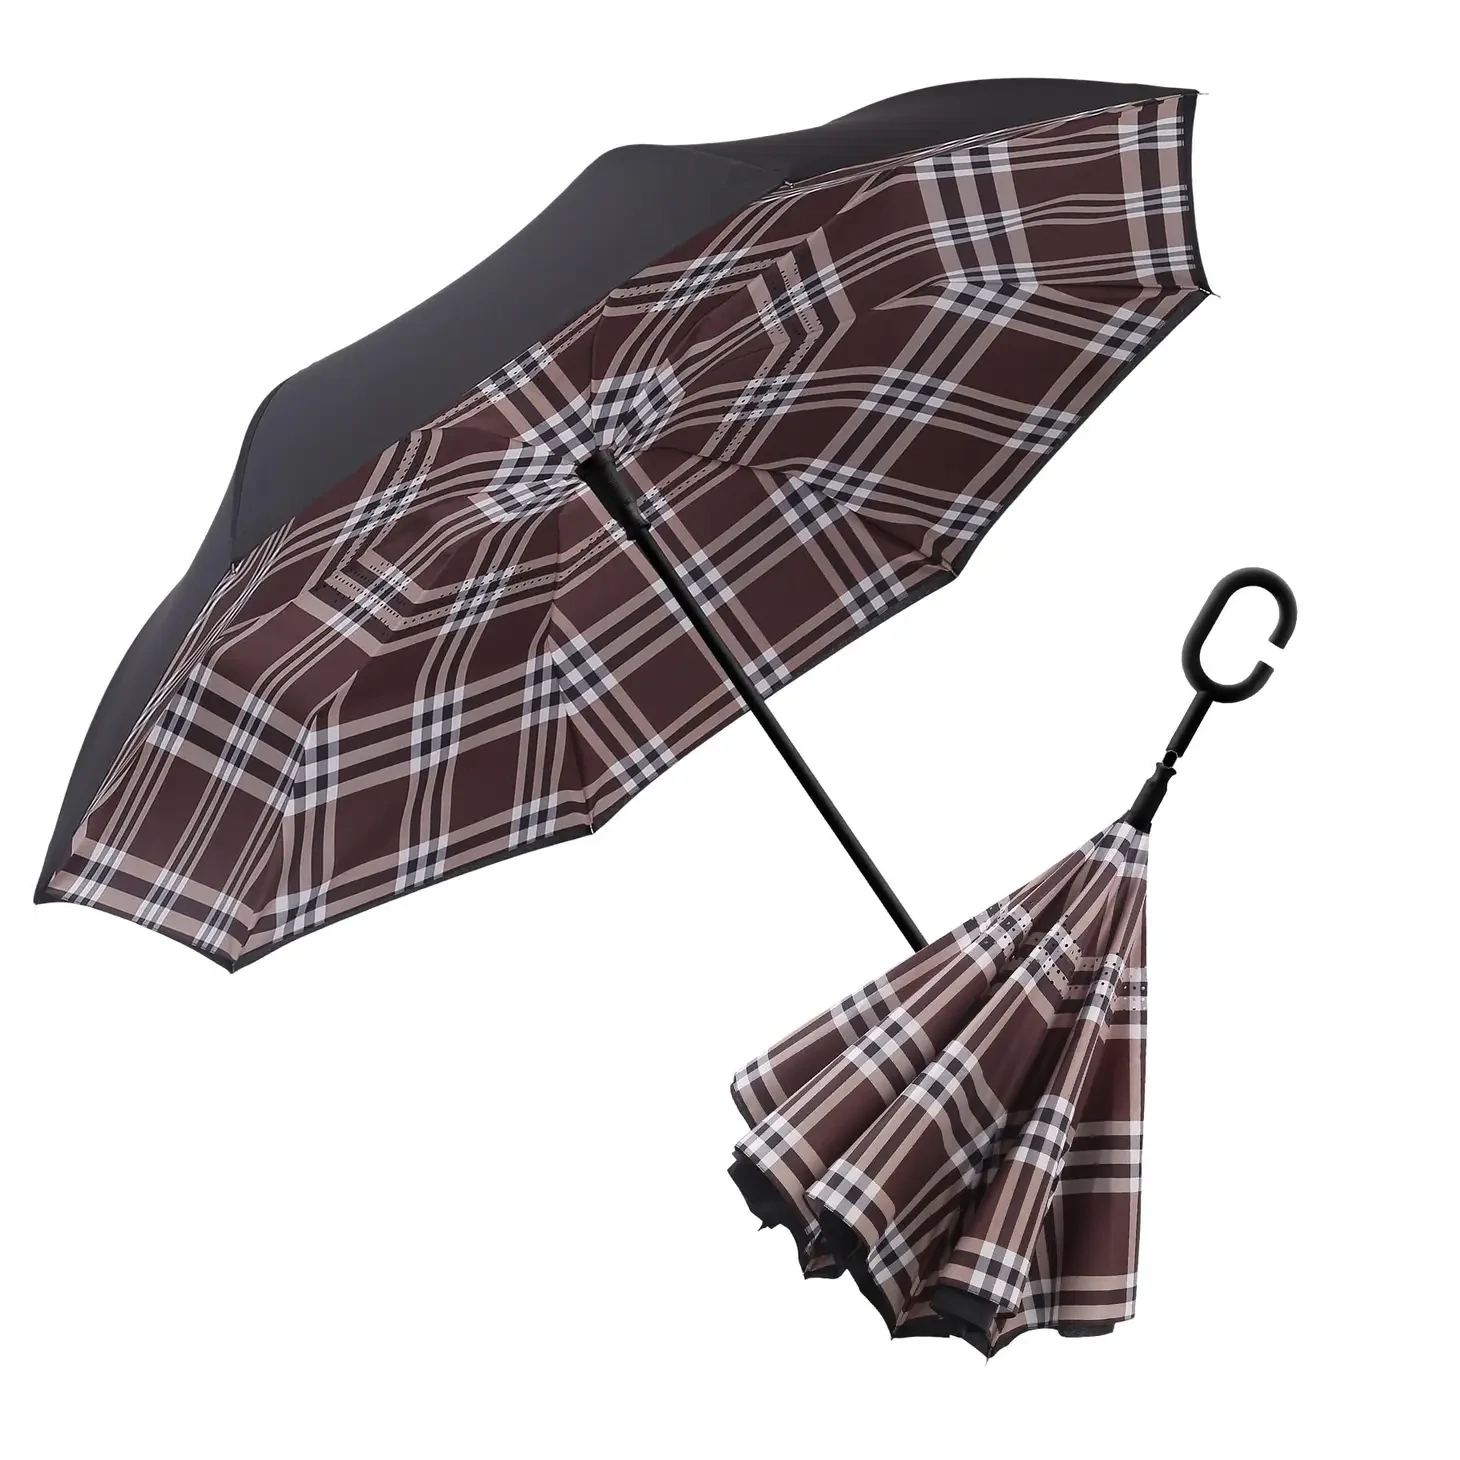 Inverted Umbrella that Covers You!